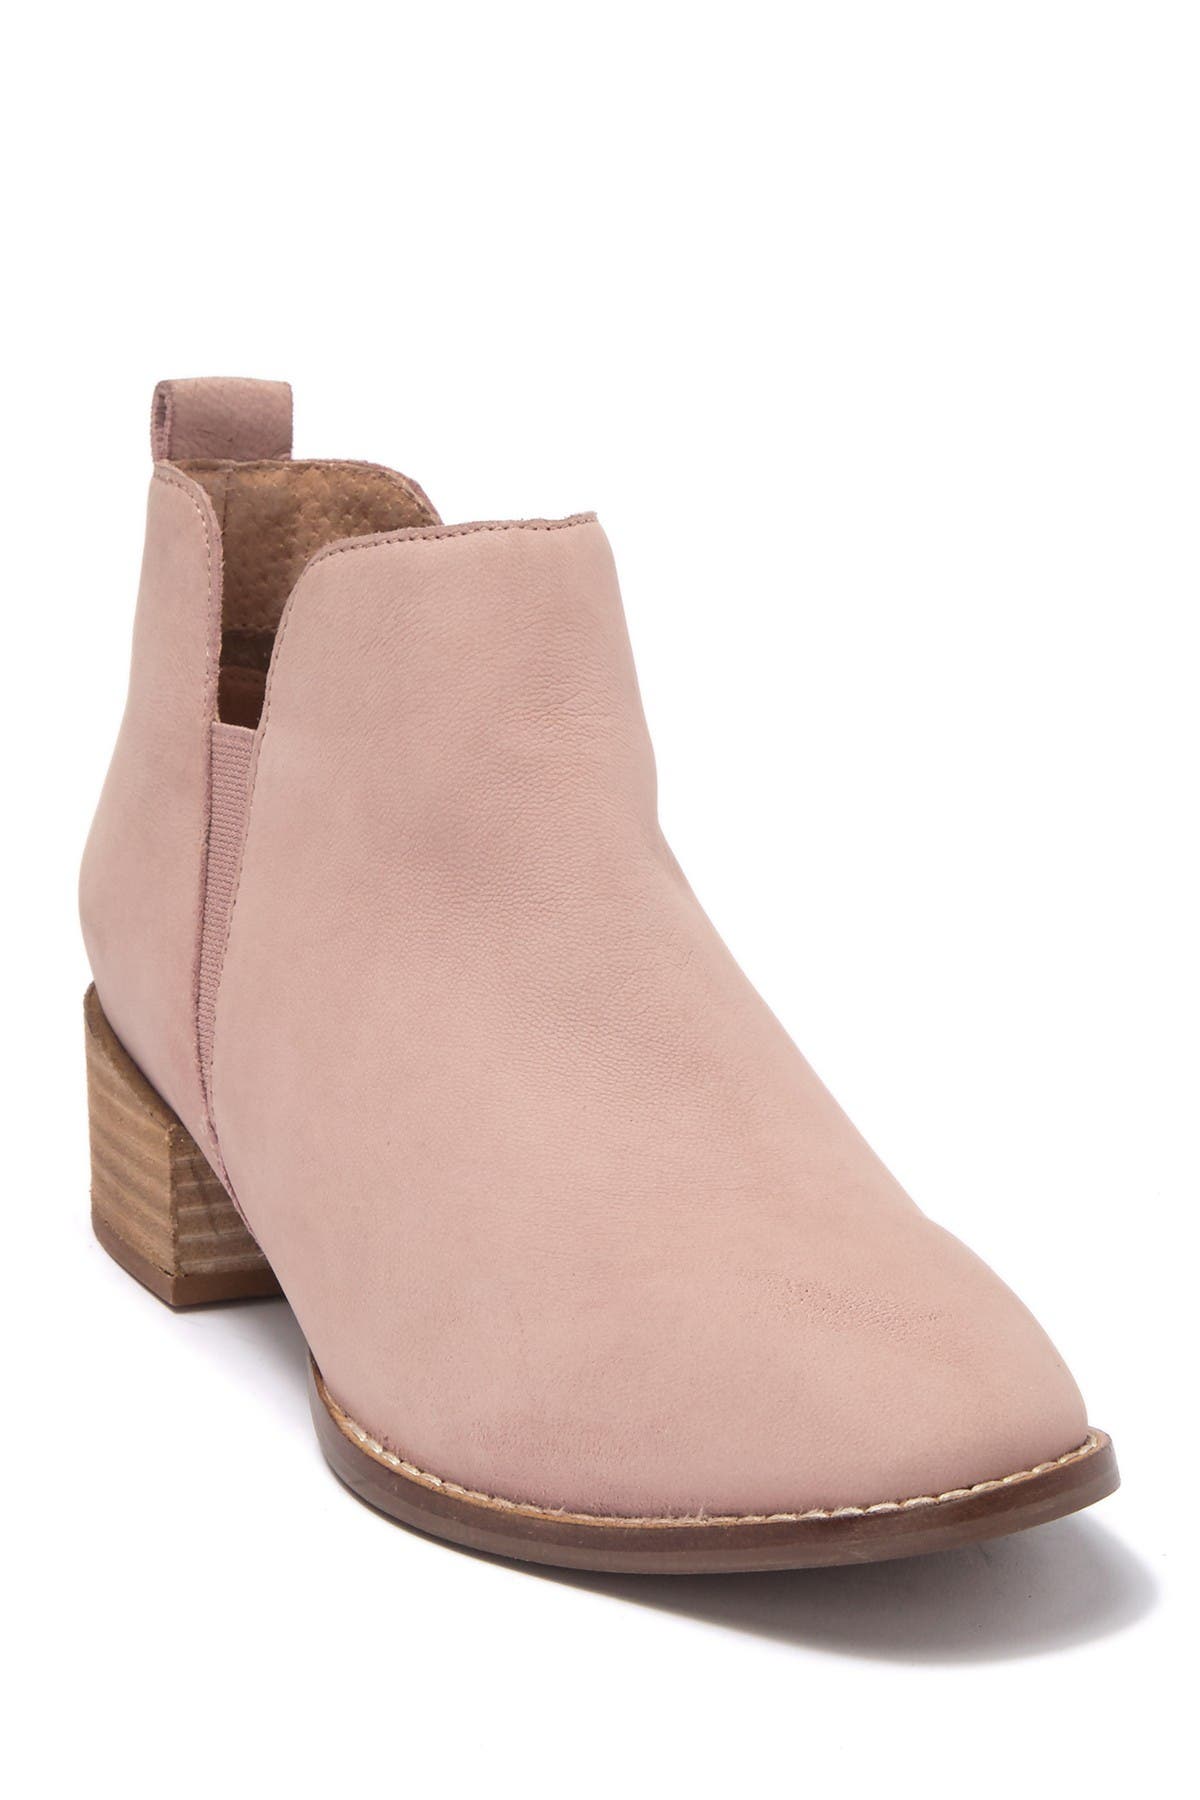 Offstage Nubuck Leather Ankle Bootie 